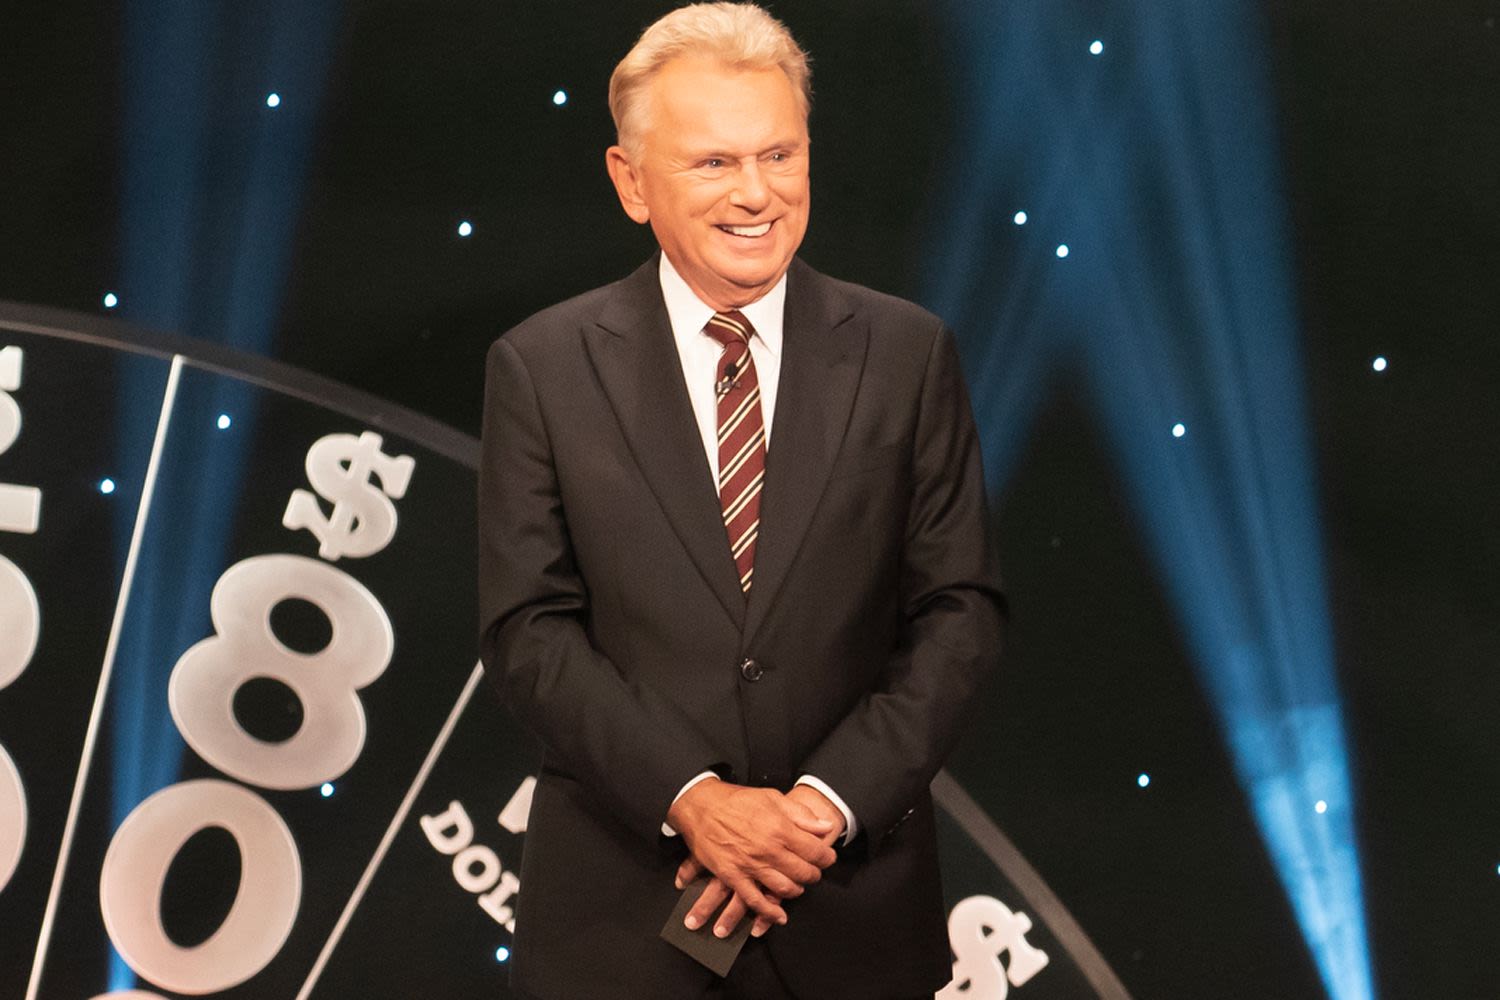 Pat Sajak on the 'Incredible Privilege' and 'Responsibility' He's Had to Viewers on Final “Wheel of Fortune” Episode